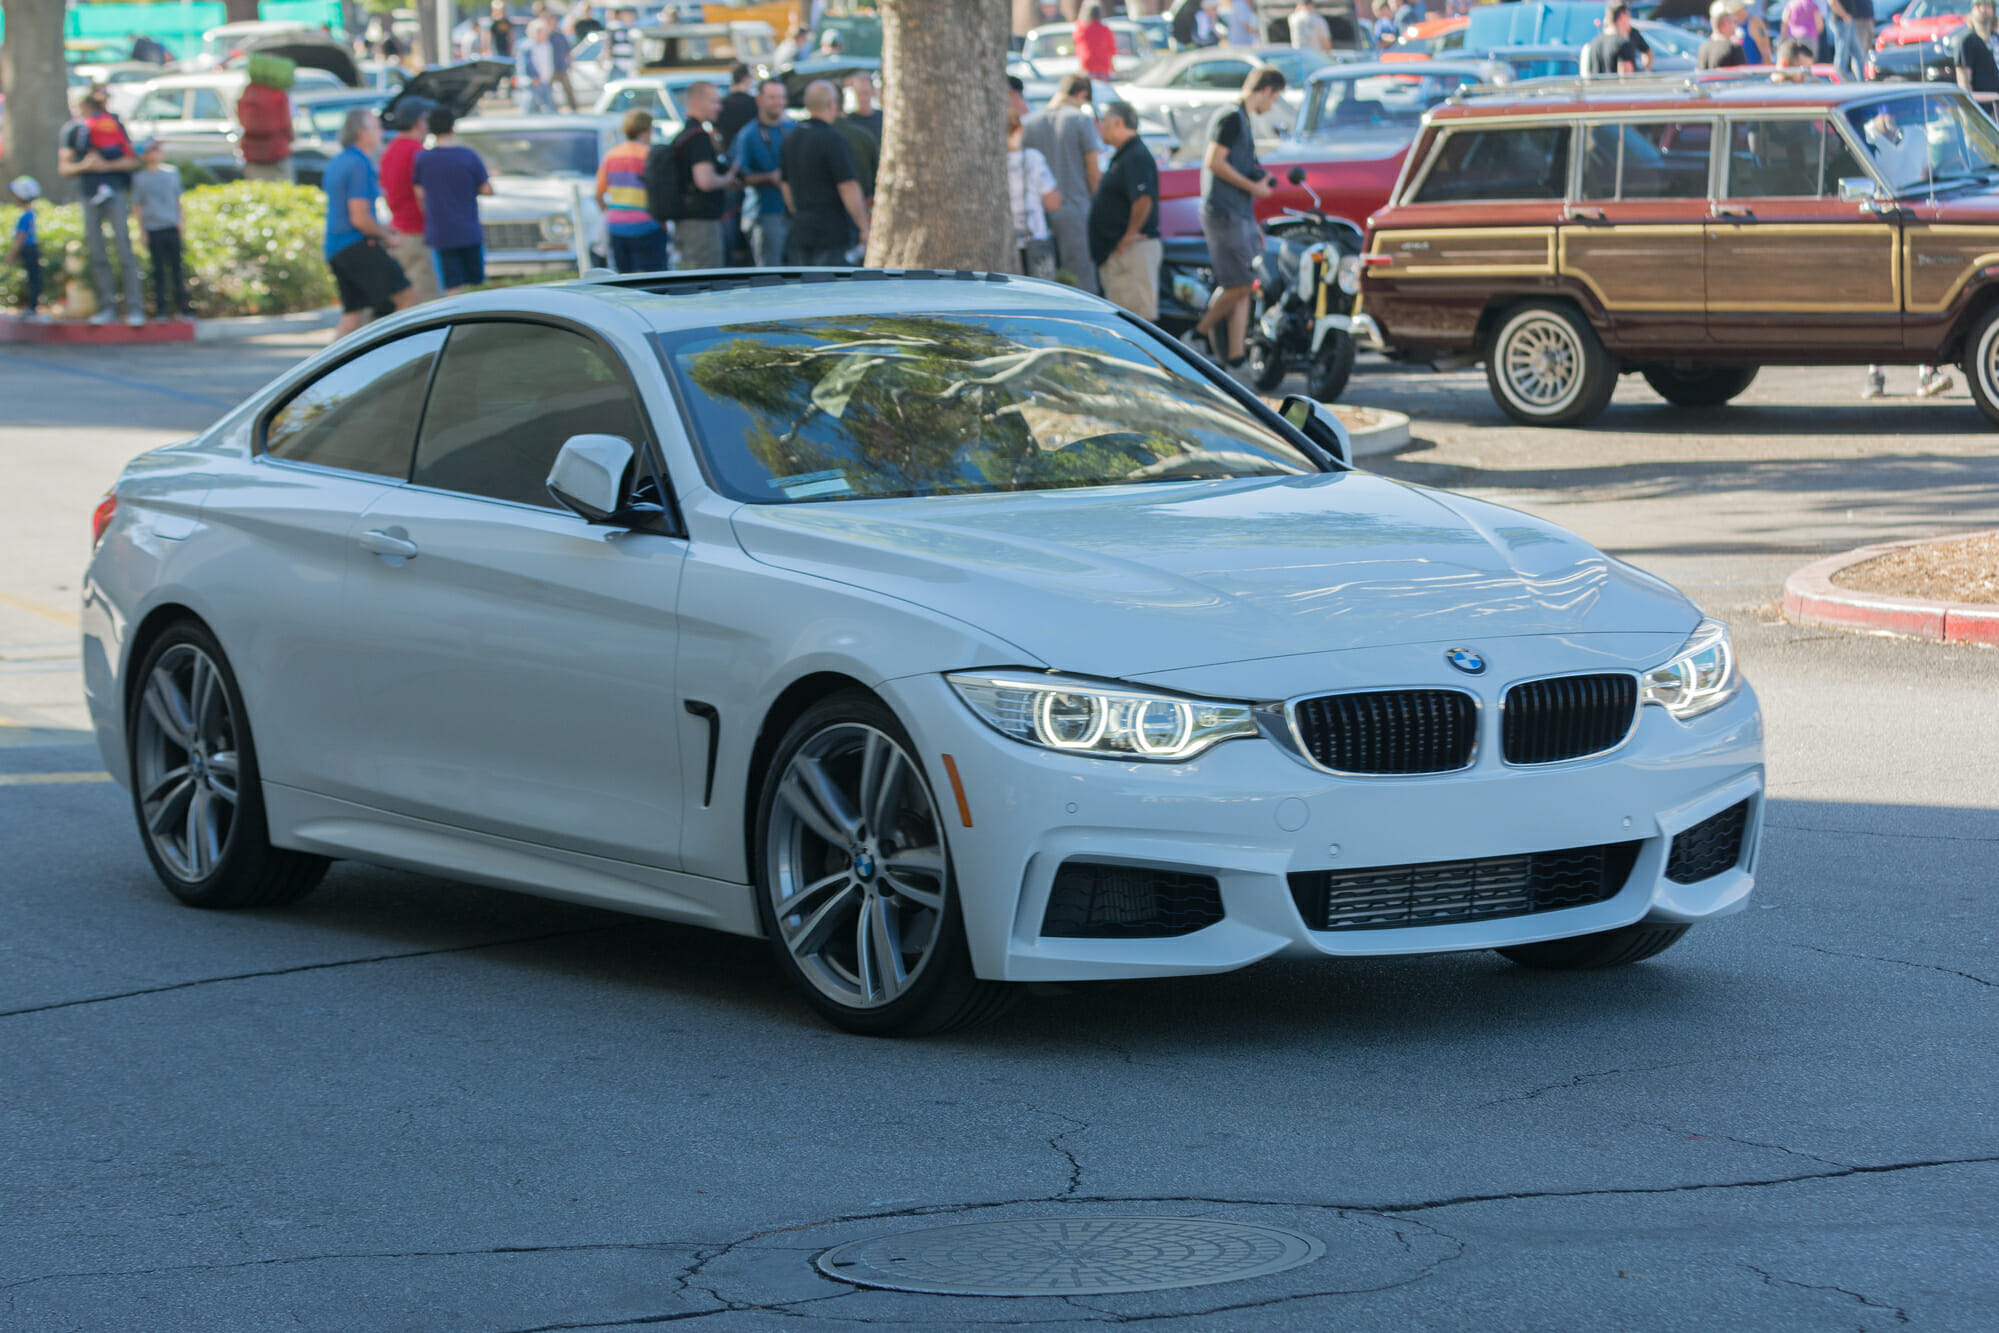 BMW M4 Specs and Power Ratings - VehicleHistory